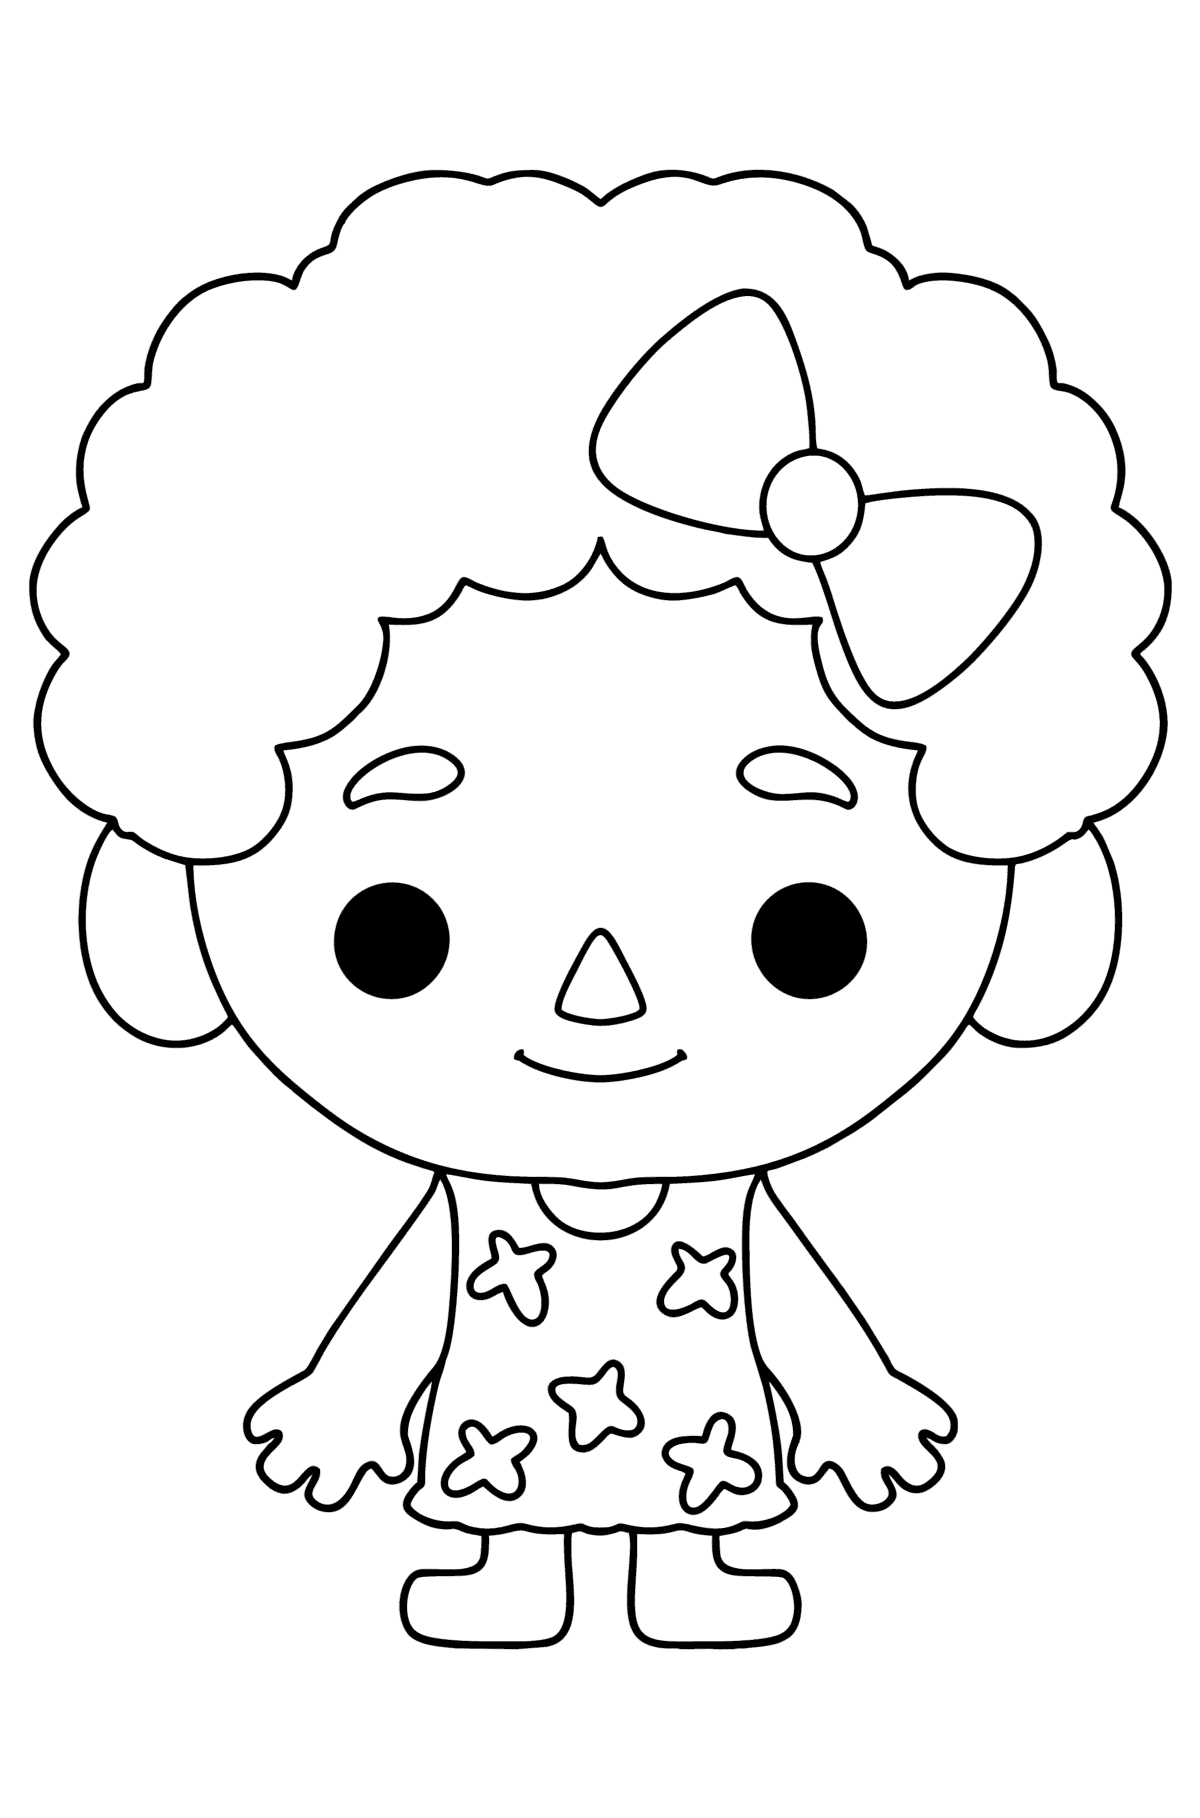 Coloring page Baby tocaboca 02 - Coloring Pages for Kids